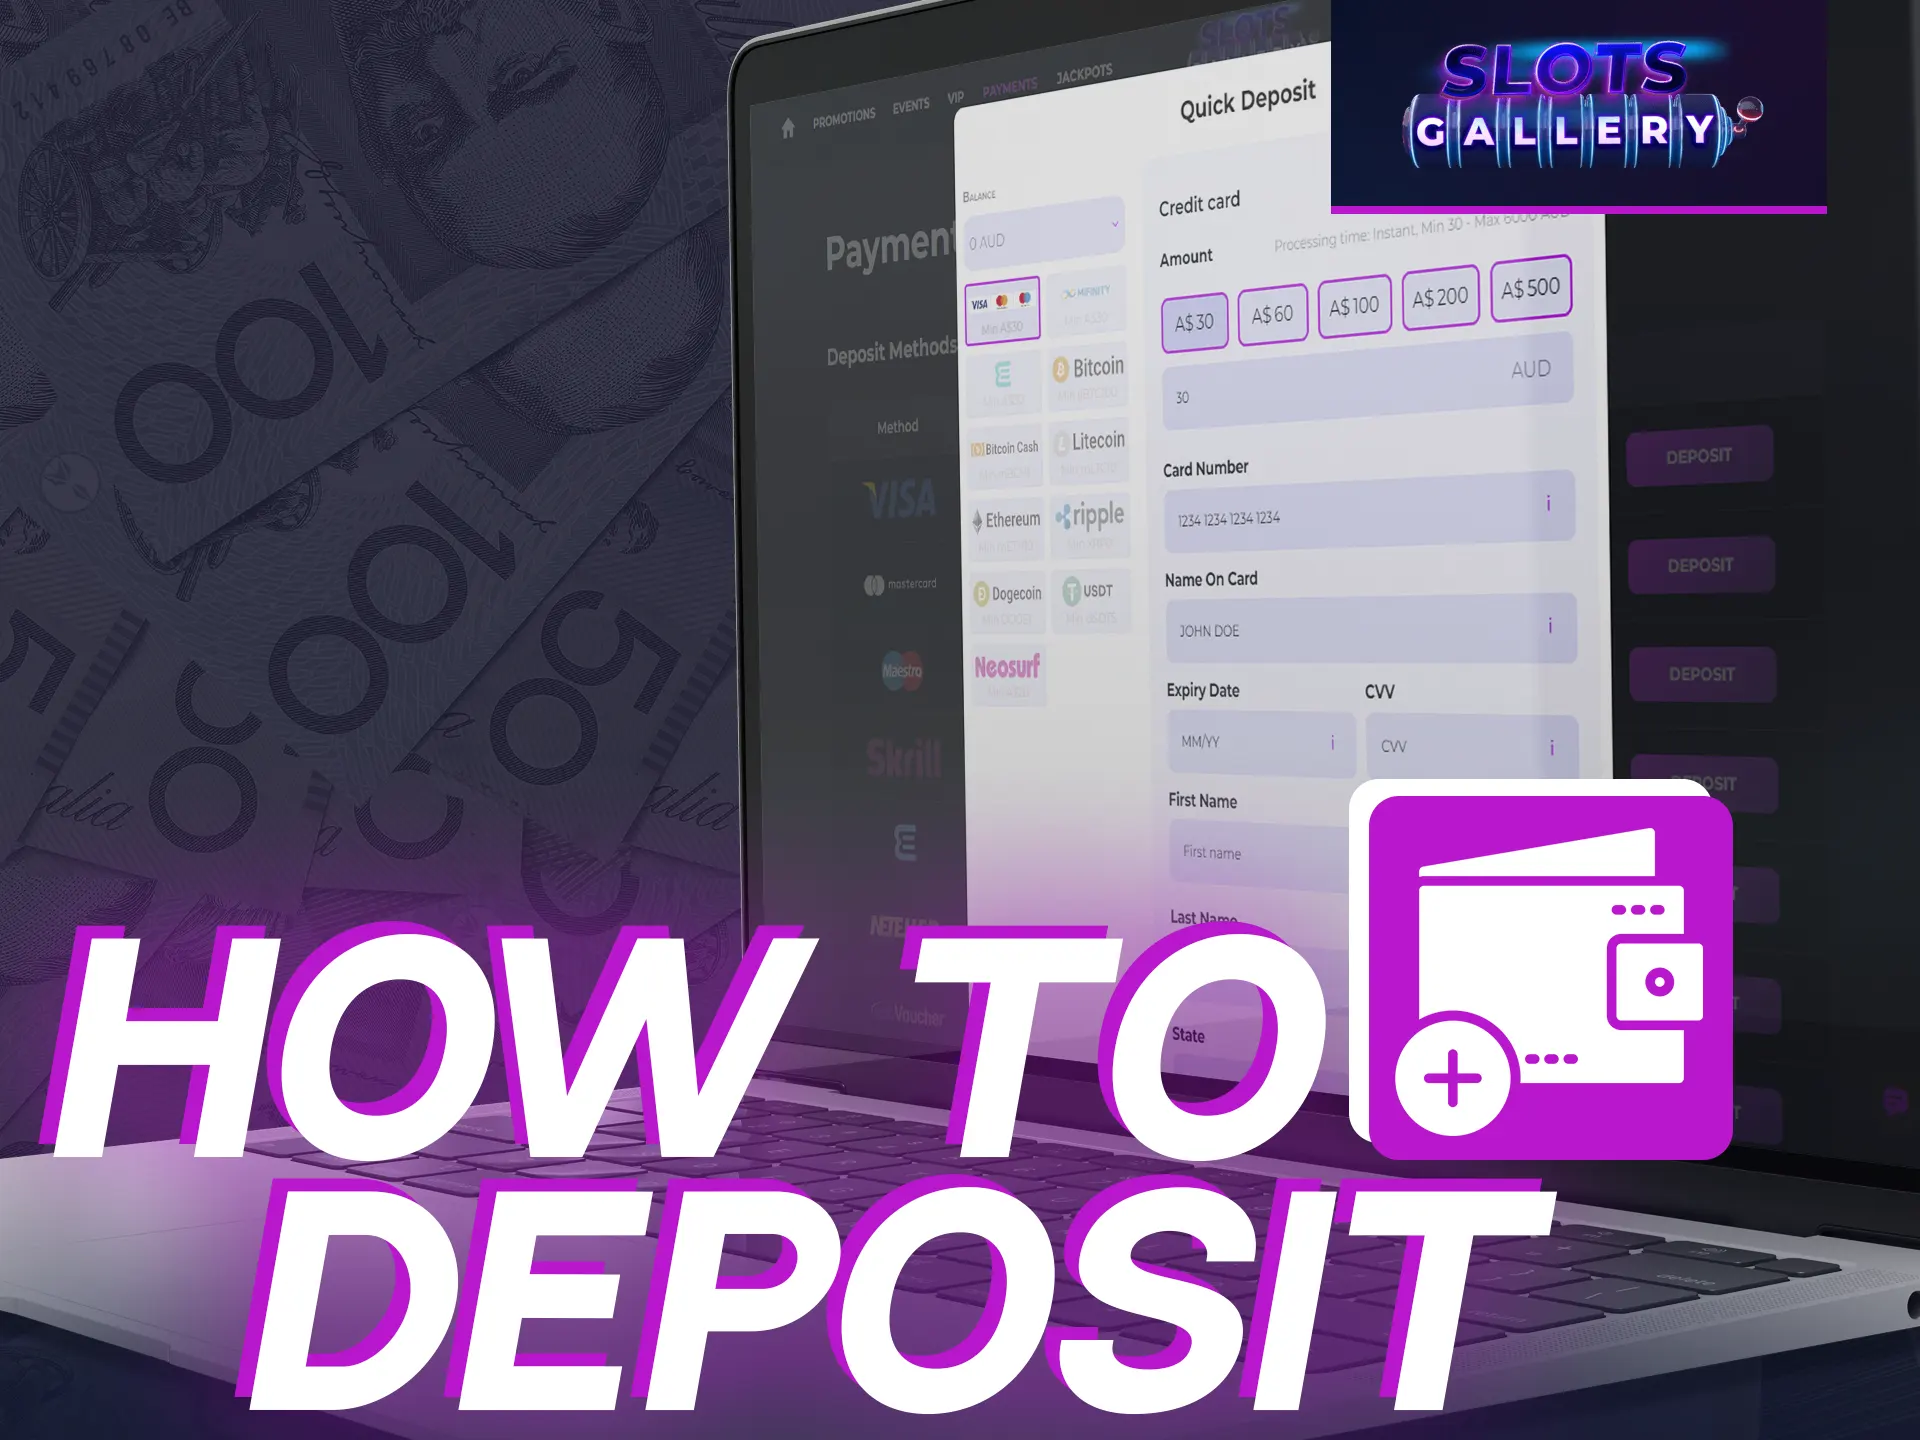 Easily deposit with Slots Gallery by signing in and confirming.